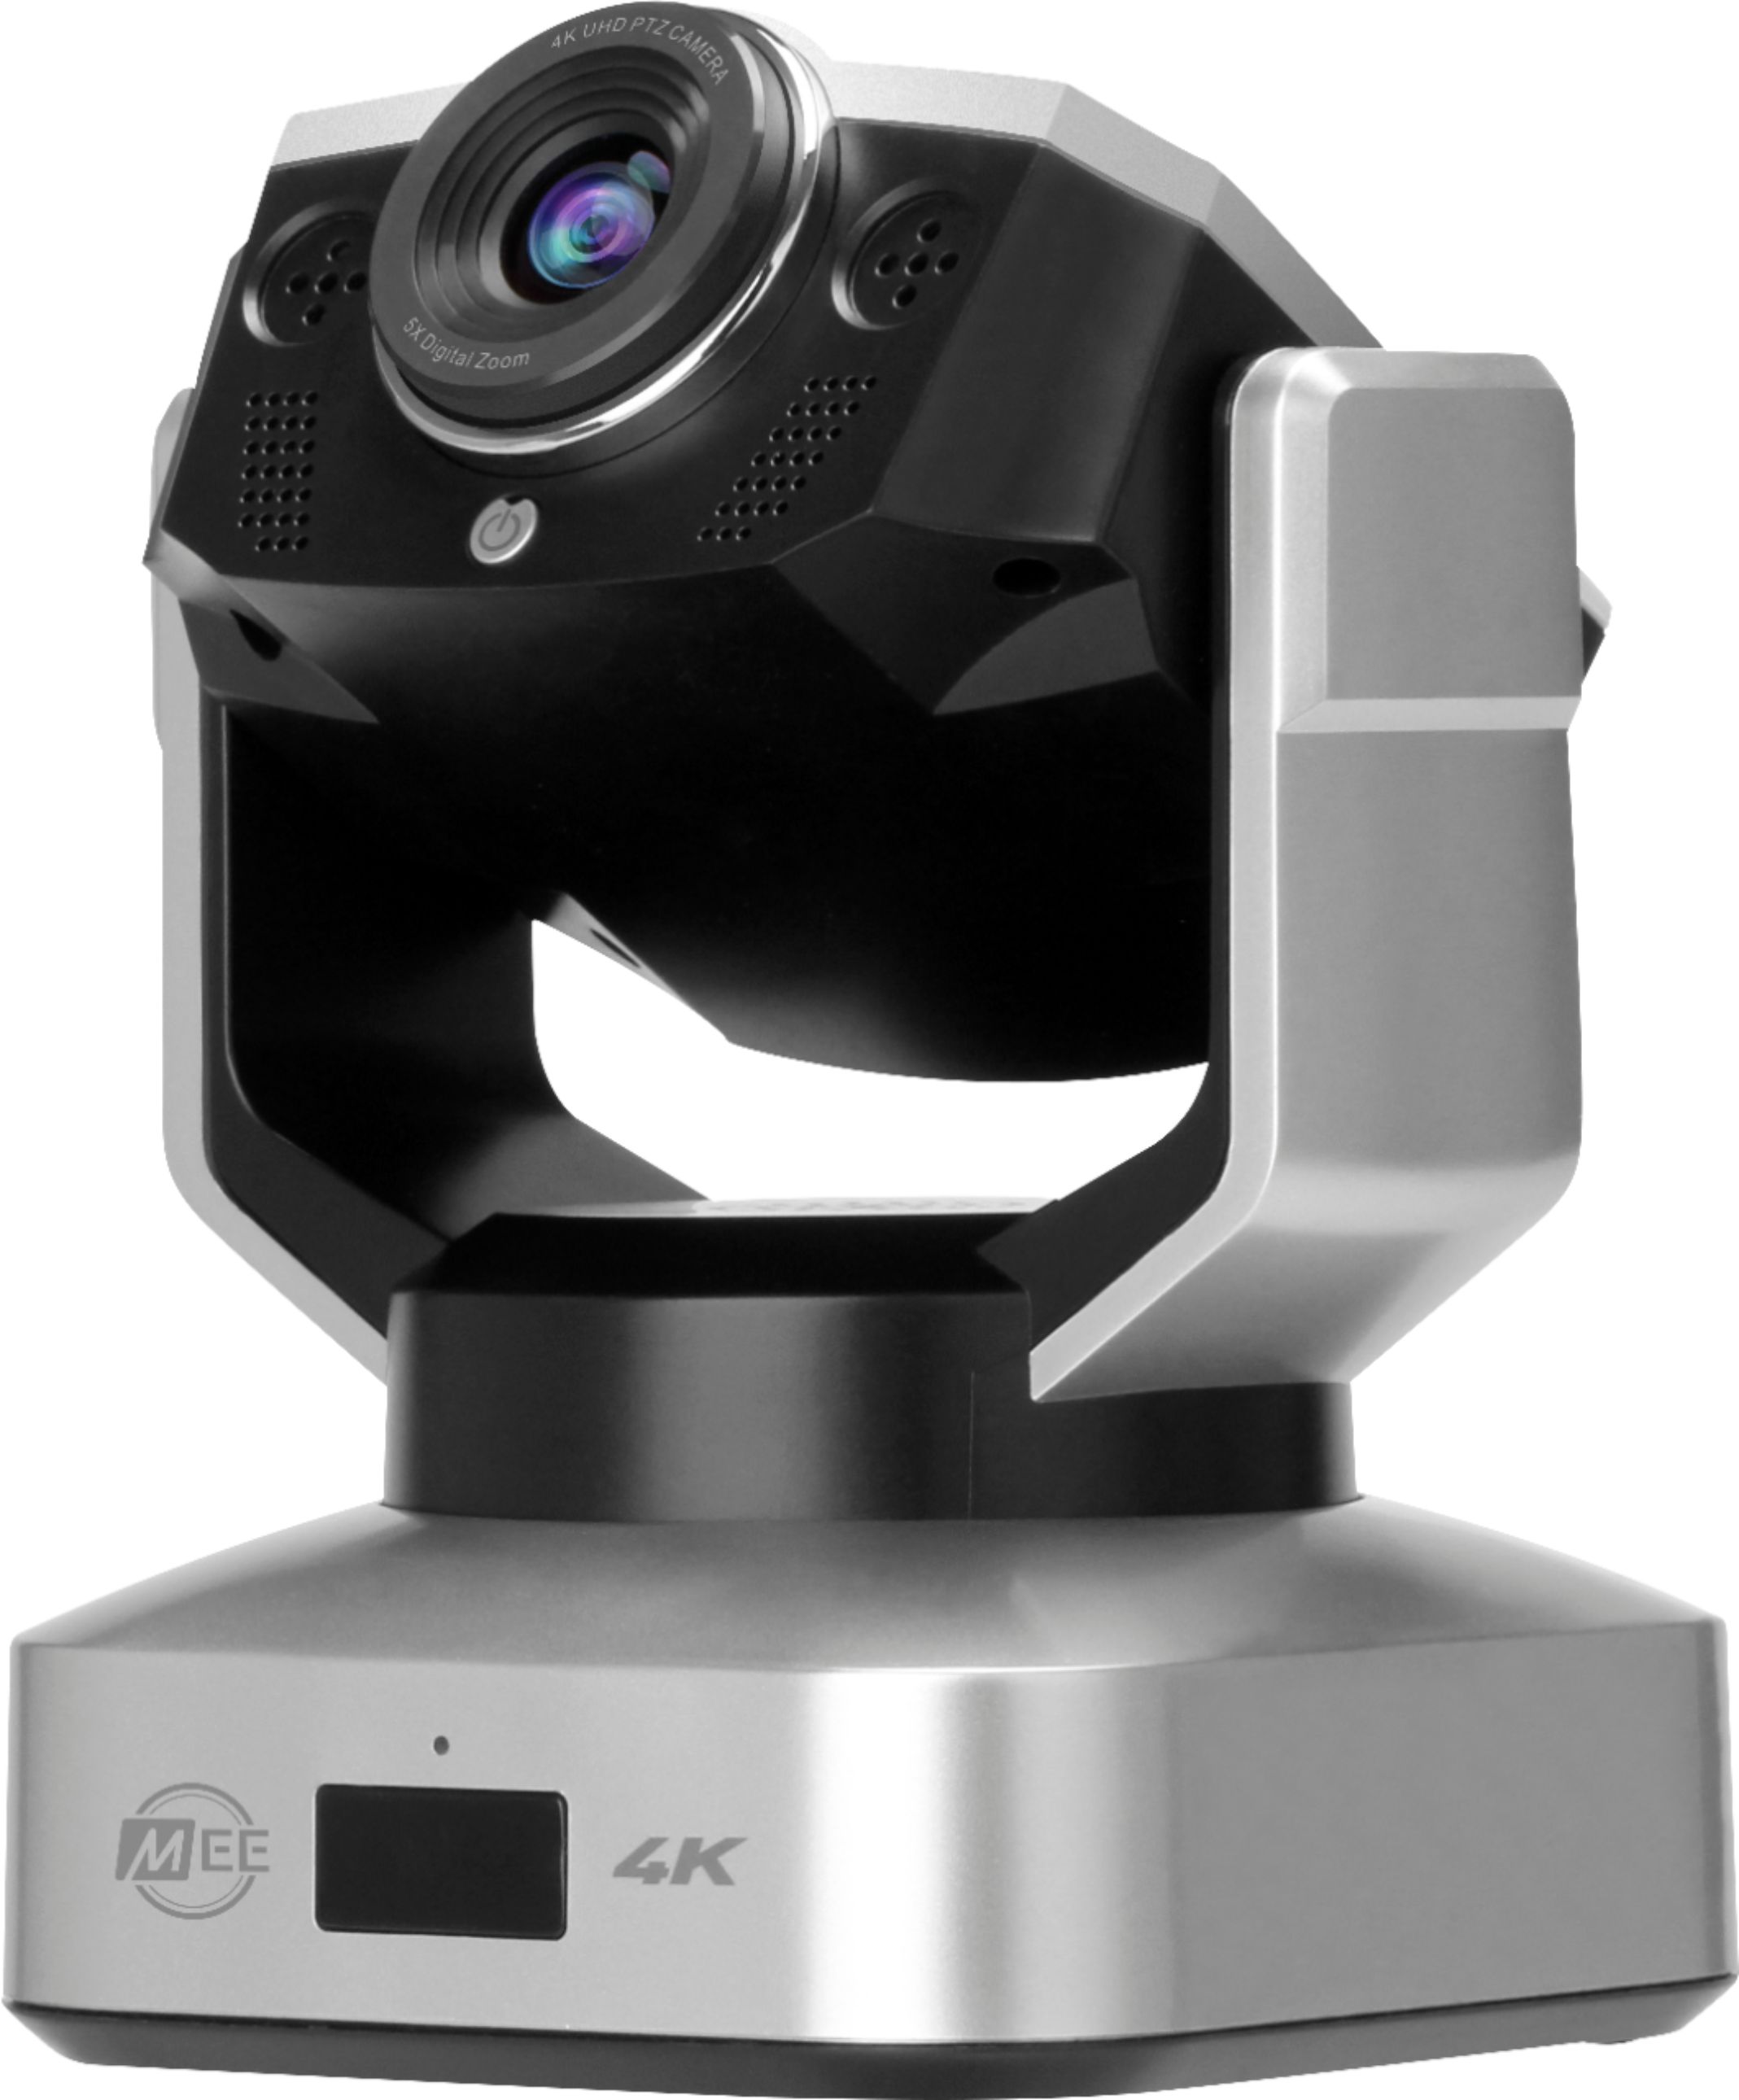 Left View: MEE audio - 3840 x 2160 Webcam with Pan-Tilt-Zoom, for Remote Conferencing